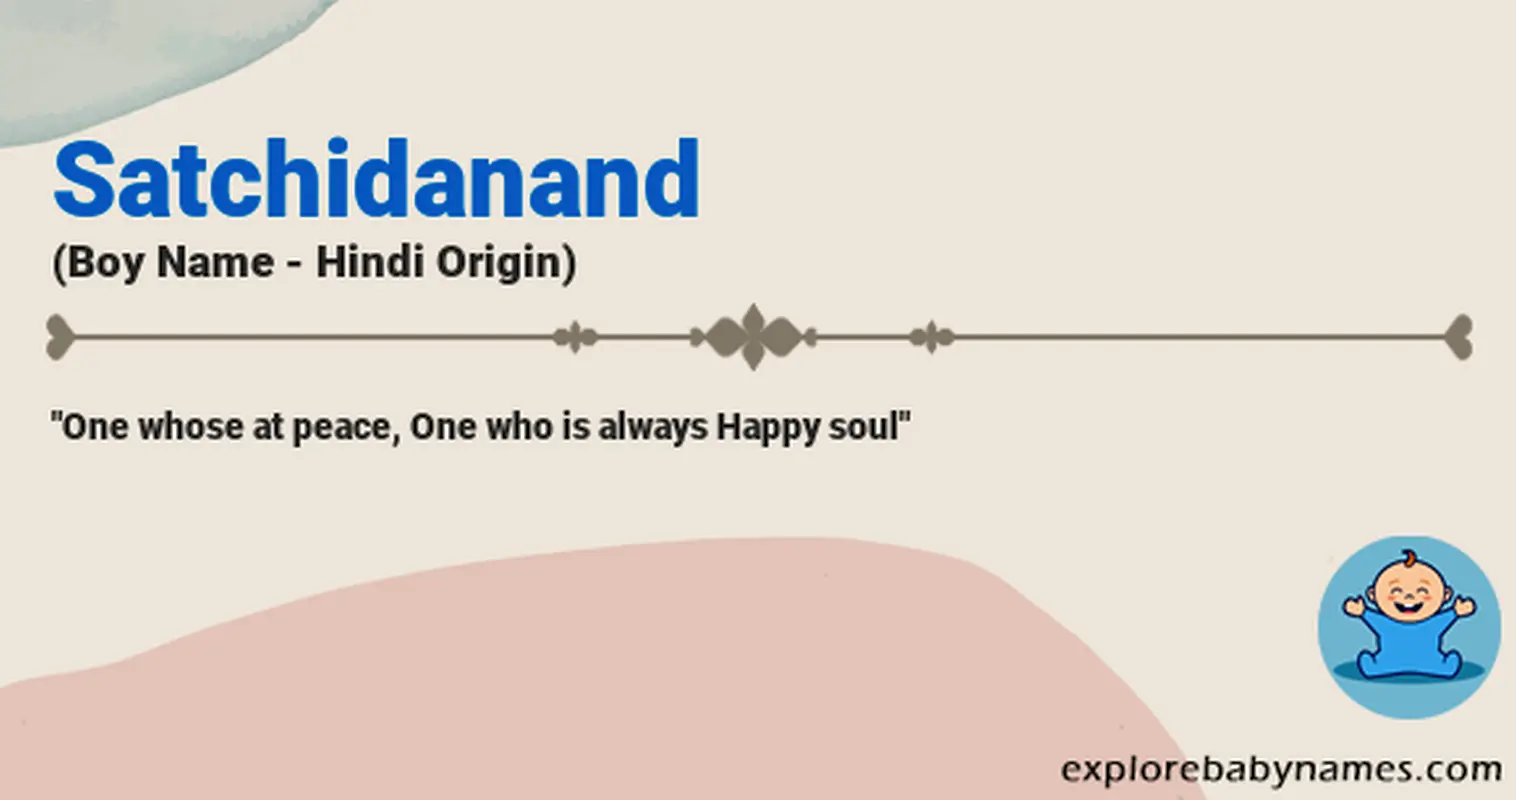 Meaning of Satchidanand